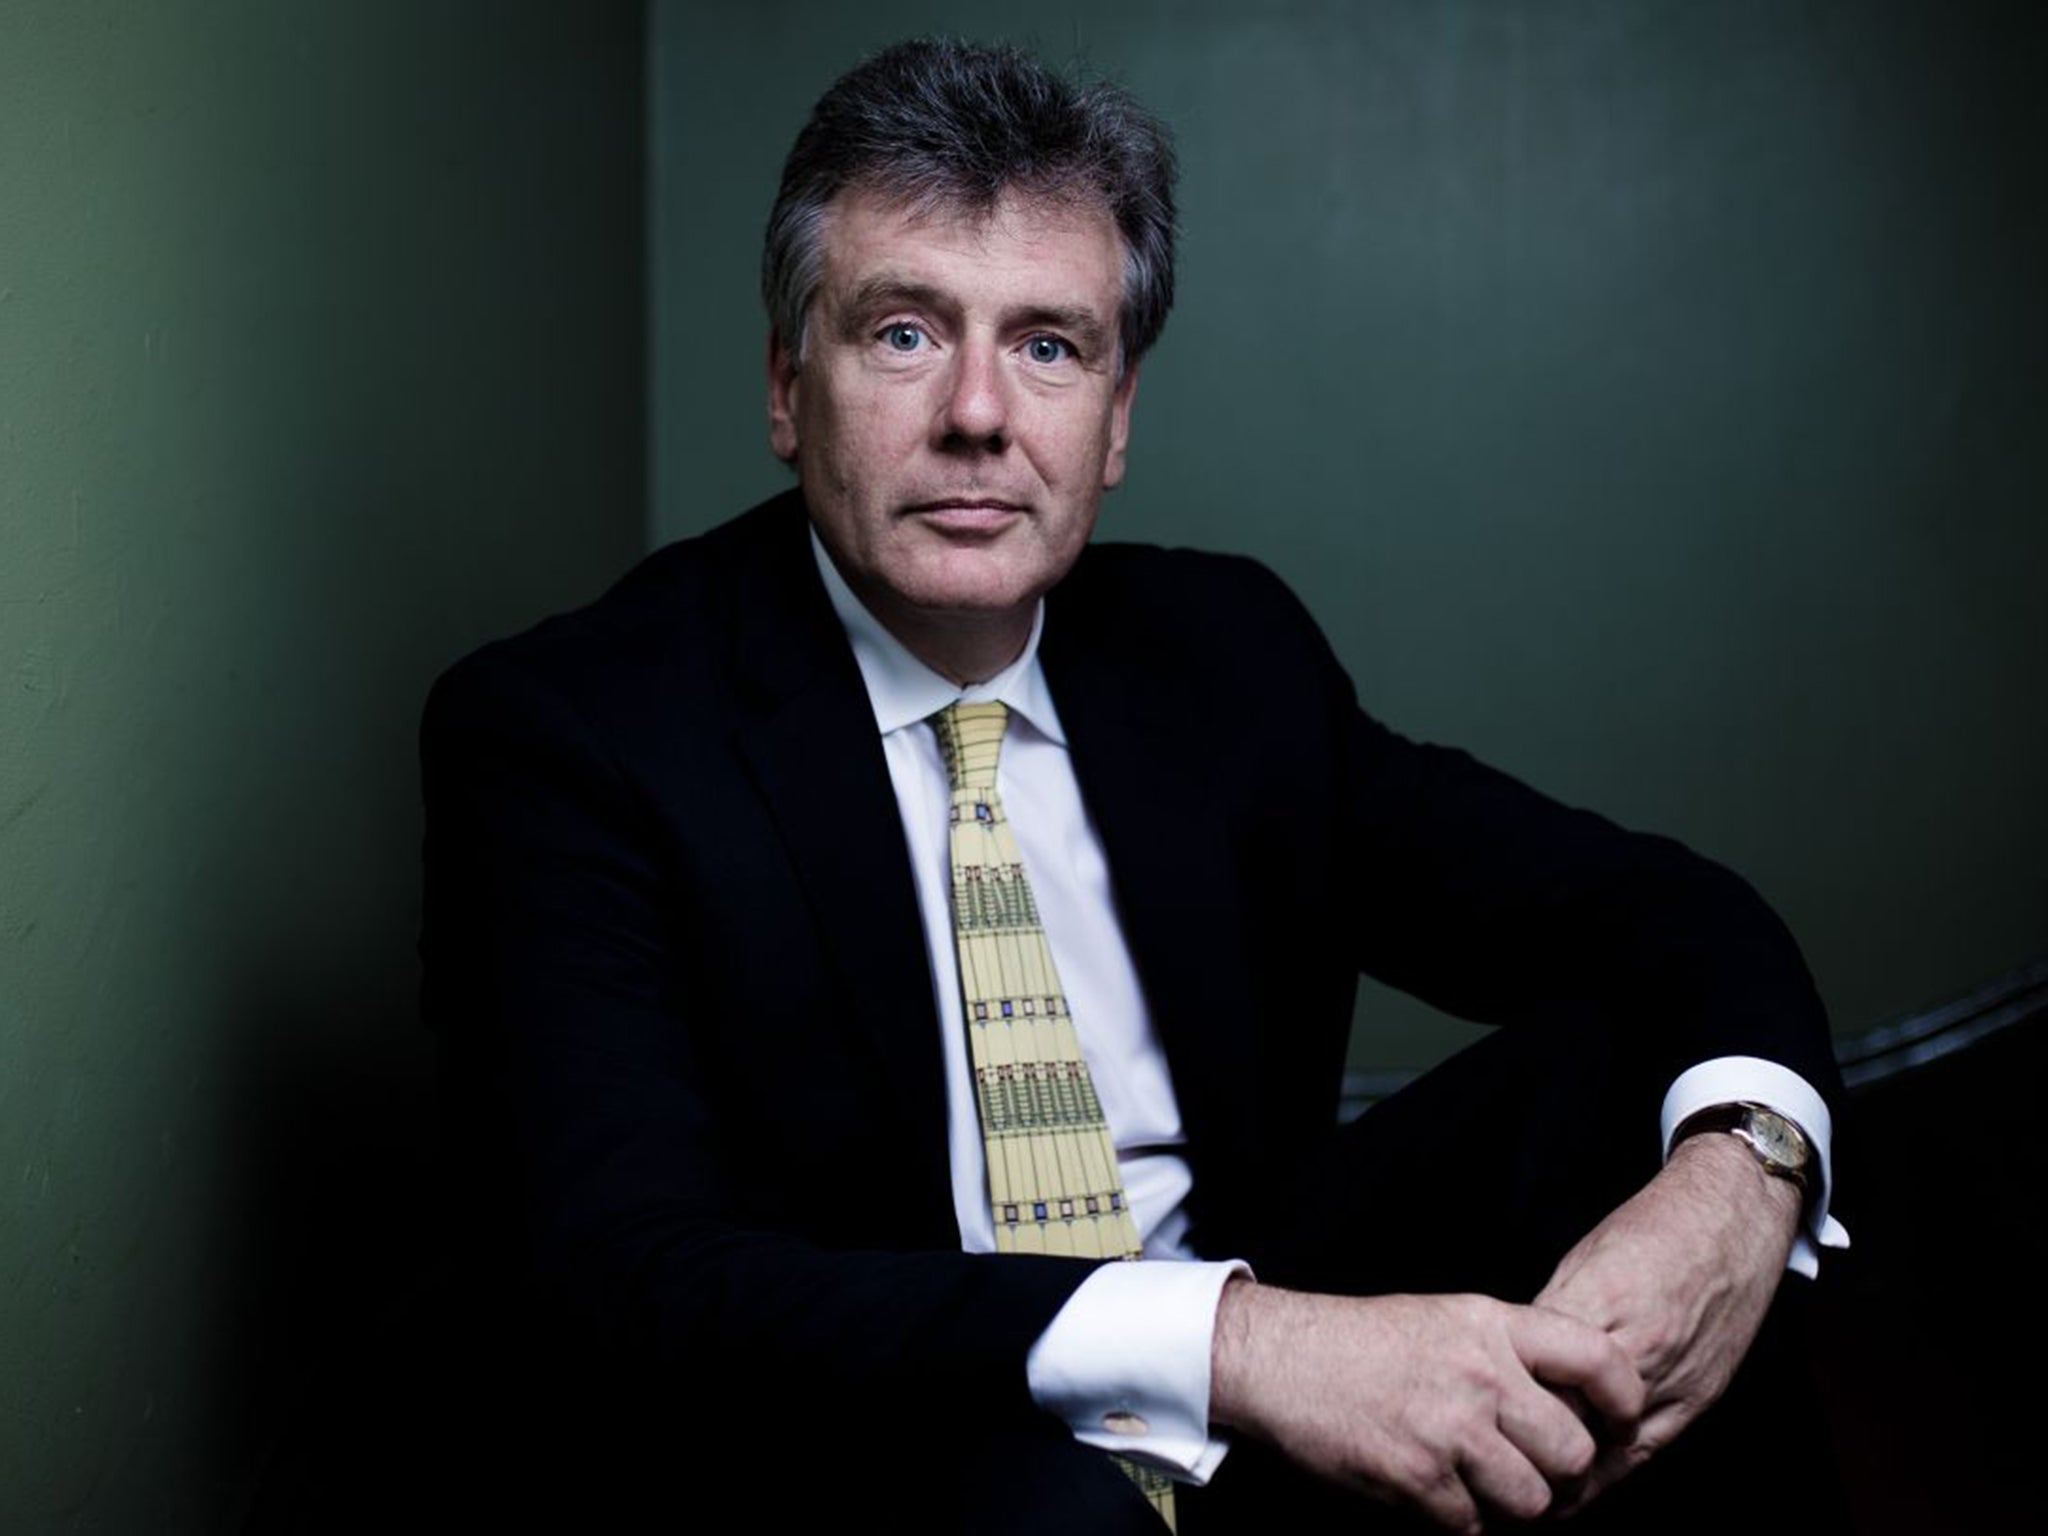 Neil Carmichael chaired the House of Commons Education Commitee report into the effects of Brexit on higher education